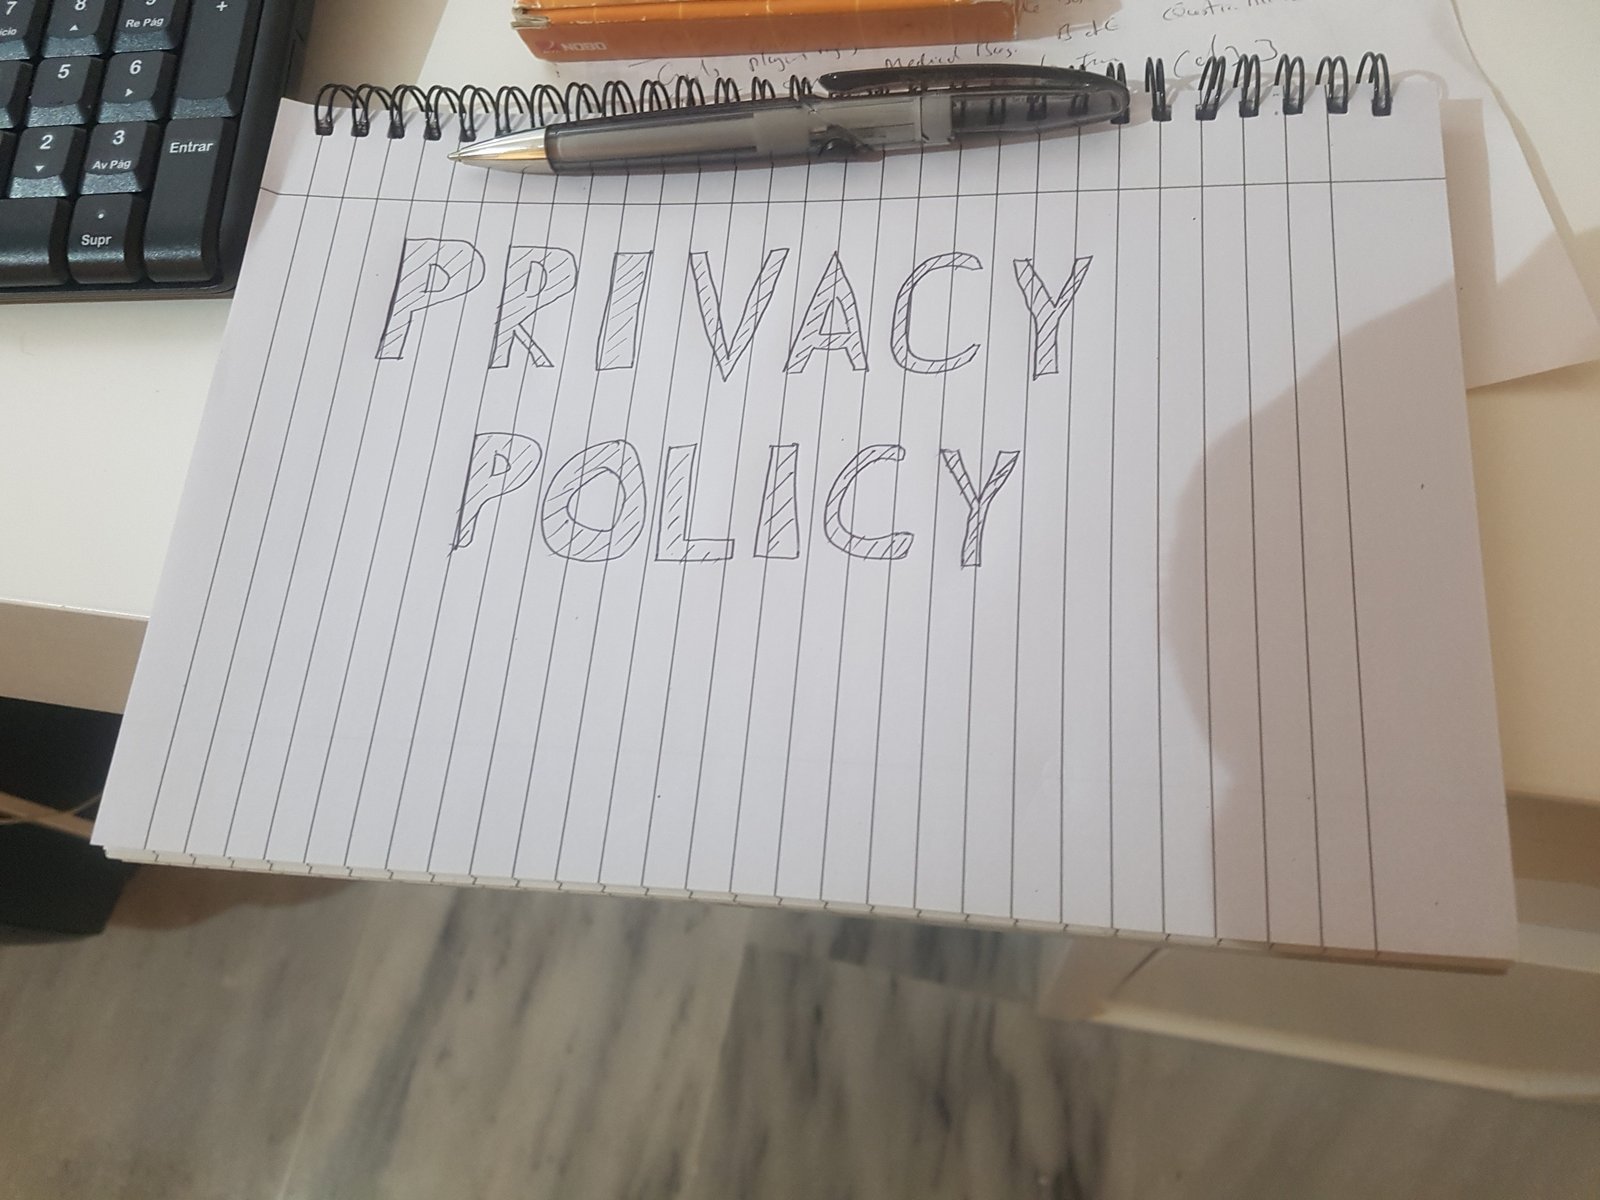 Image shows the word "Privacy Policy" handwritten on a spiral pad with the pen that did it positioned next to a keyboard.